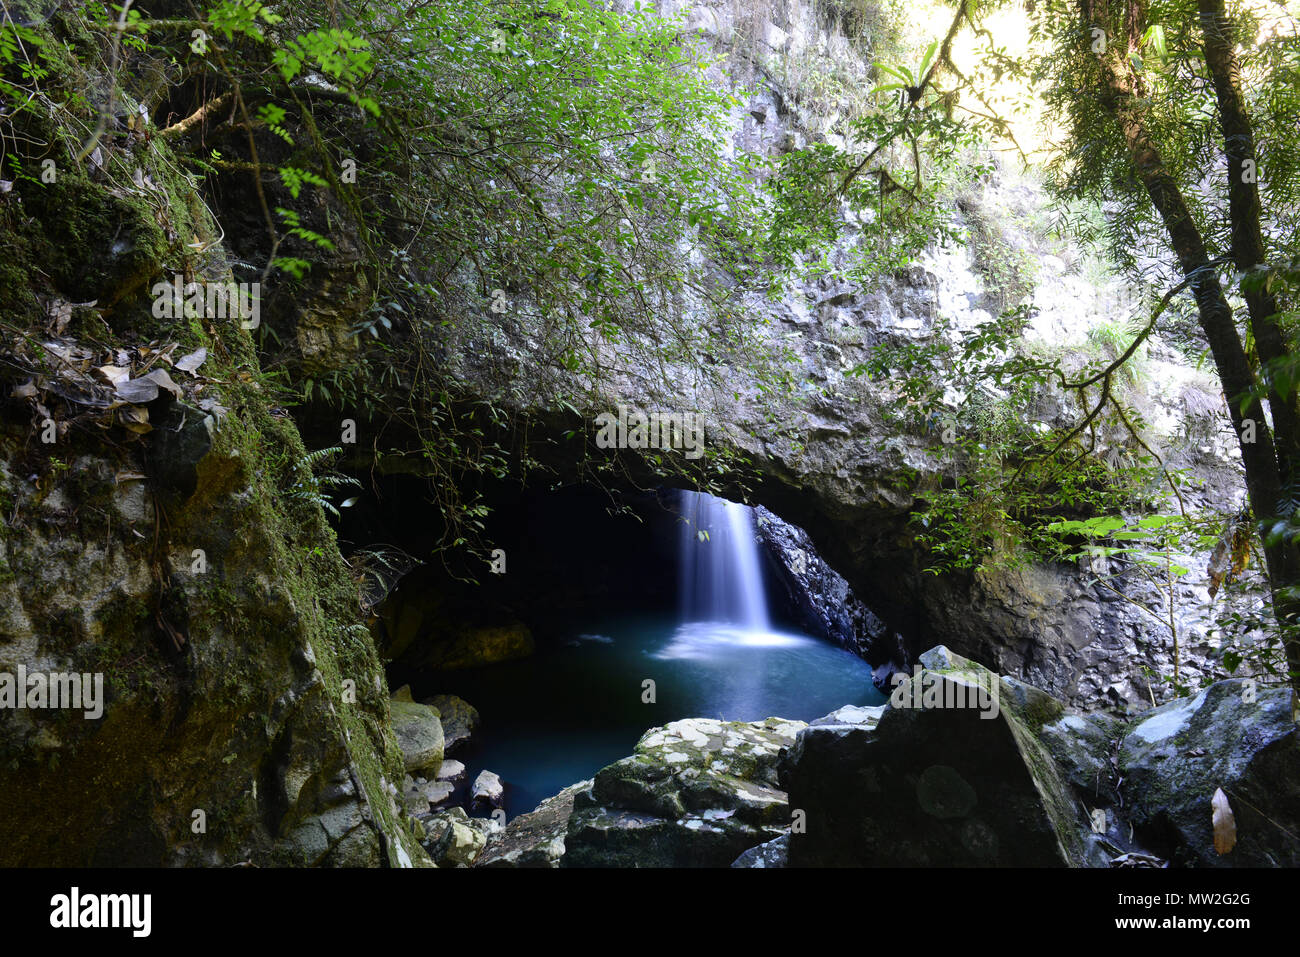 The Natural bridge and waterfall at Springbrook national park in Queensland. Stock Photo